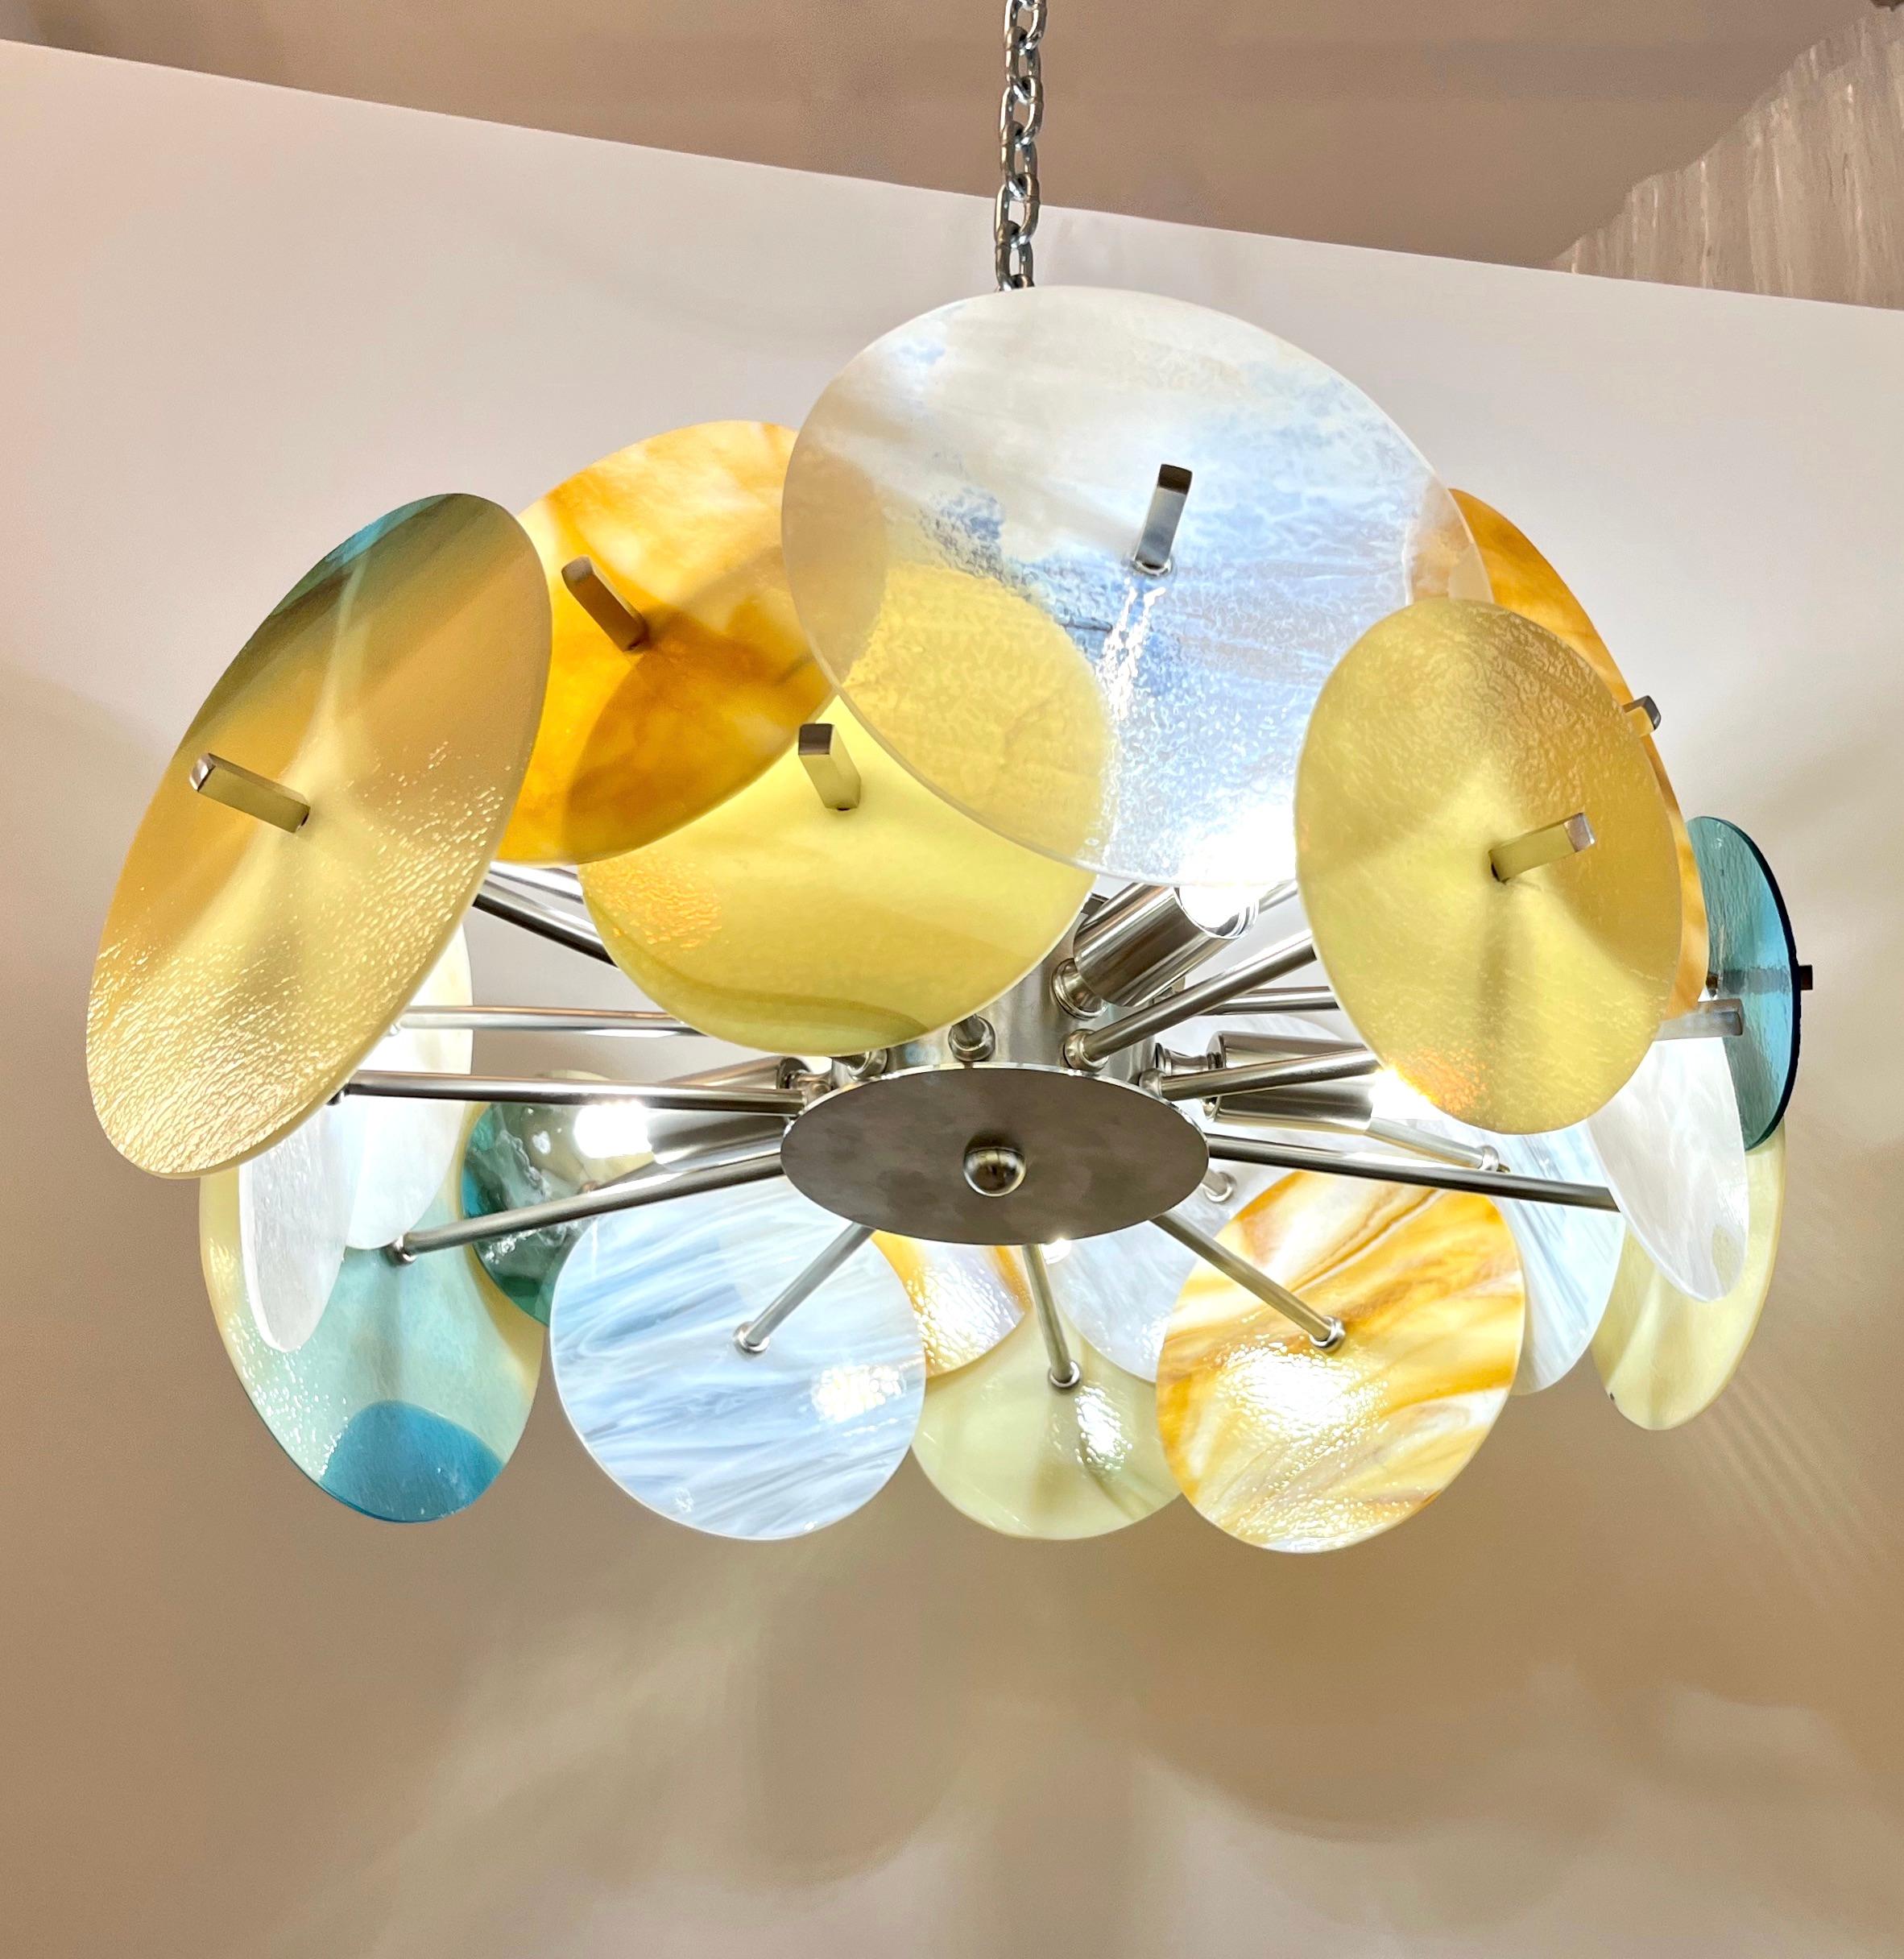 Ideal for low ceilings or above an opening door, the short height makes it a very functional and rare solution, this small chandelier is a little jewel, entirely customizable in colors, sizes and finishes. This is a contemporary Italian exclusive